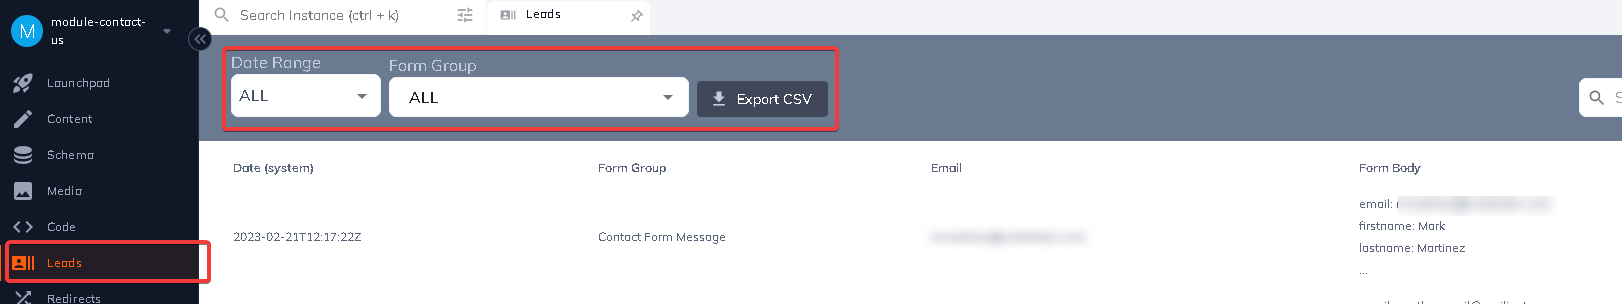 Leads can be exported using the export options shown above.